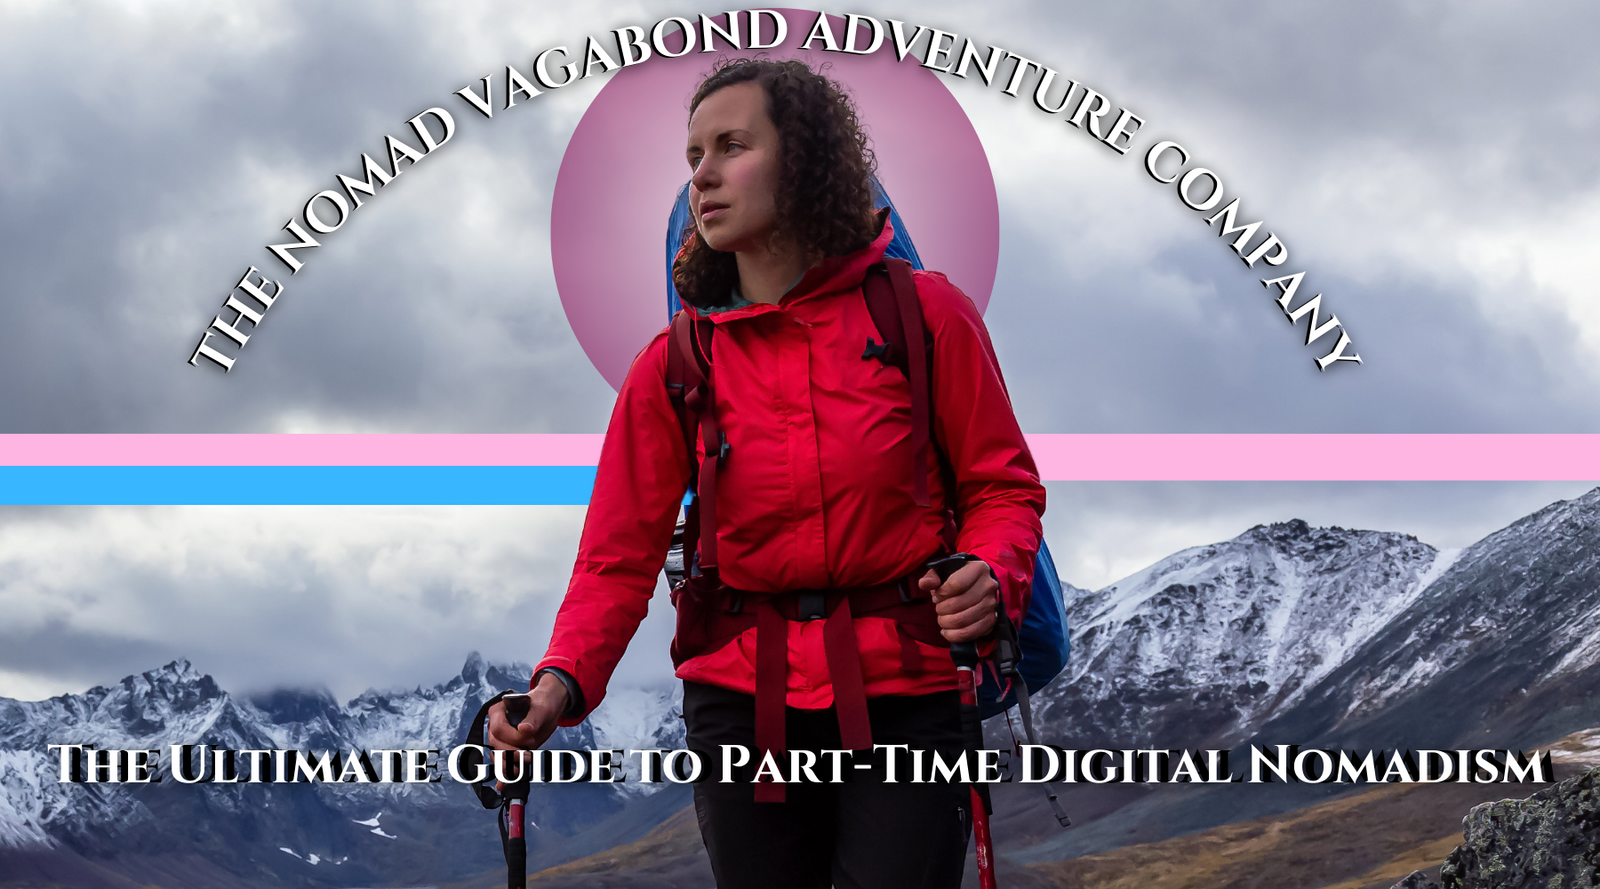 The Ultimate Guide to Part-Time Digital Nomadism